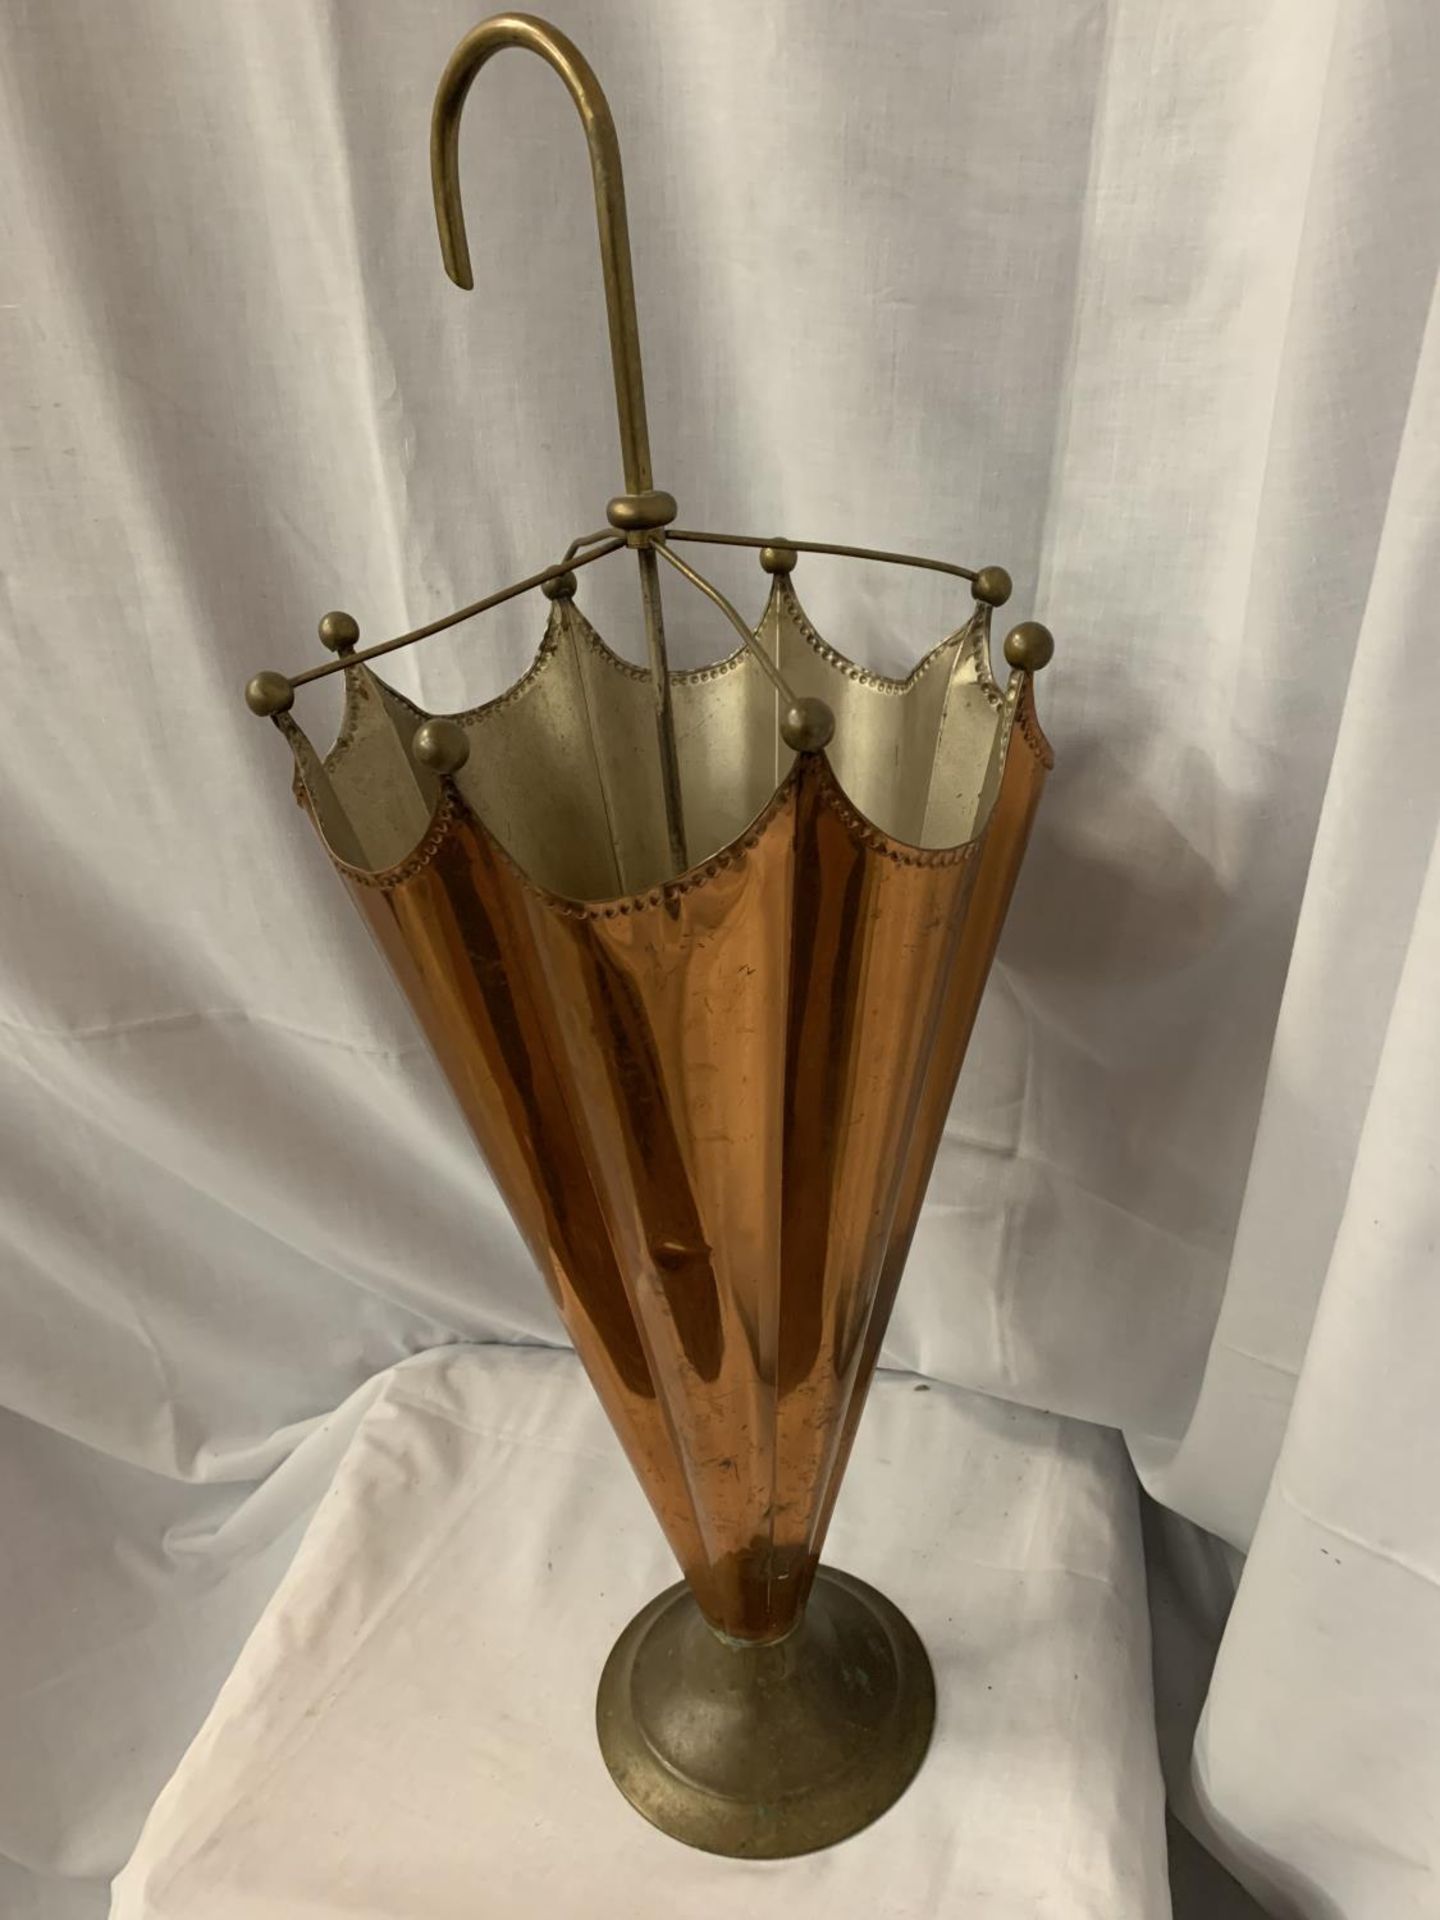 AN UNUSUAL COPPER AND BRASS UMBRELLA STAND IN THE FORM OF AN UMBRELLA - Image 3 of 3